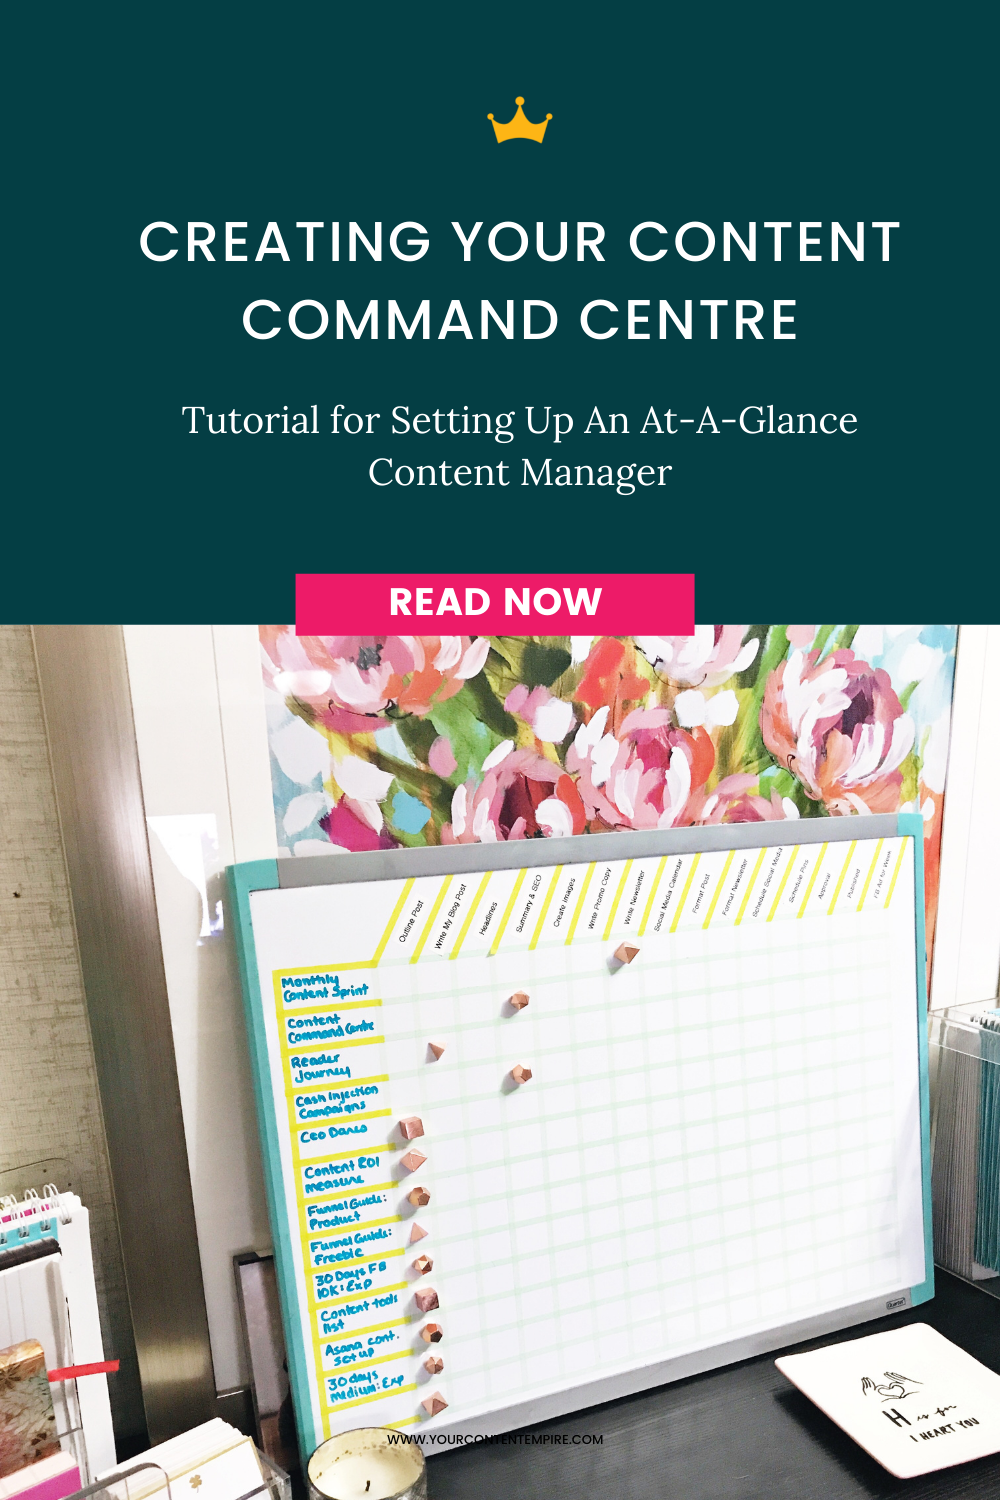 Creating Your Content Command Centre